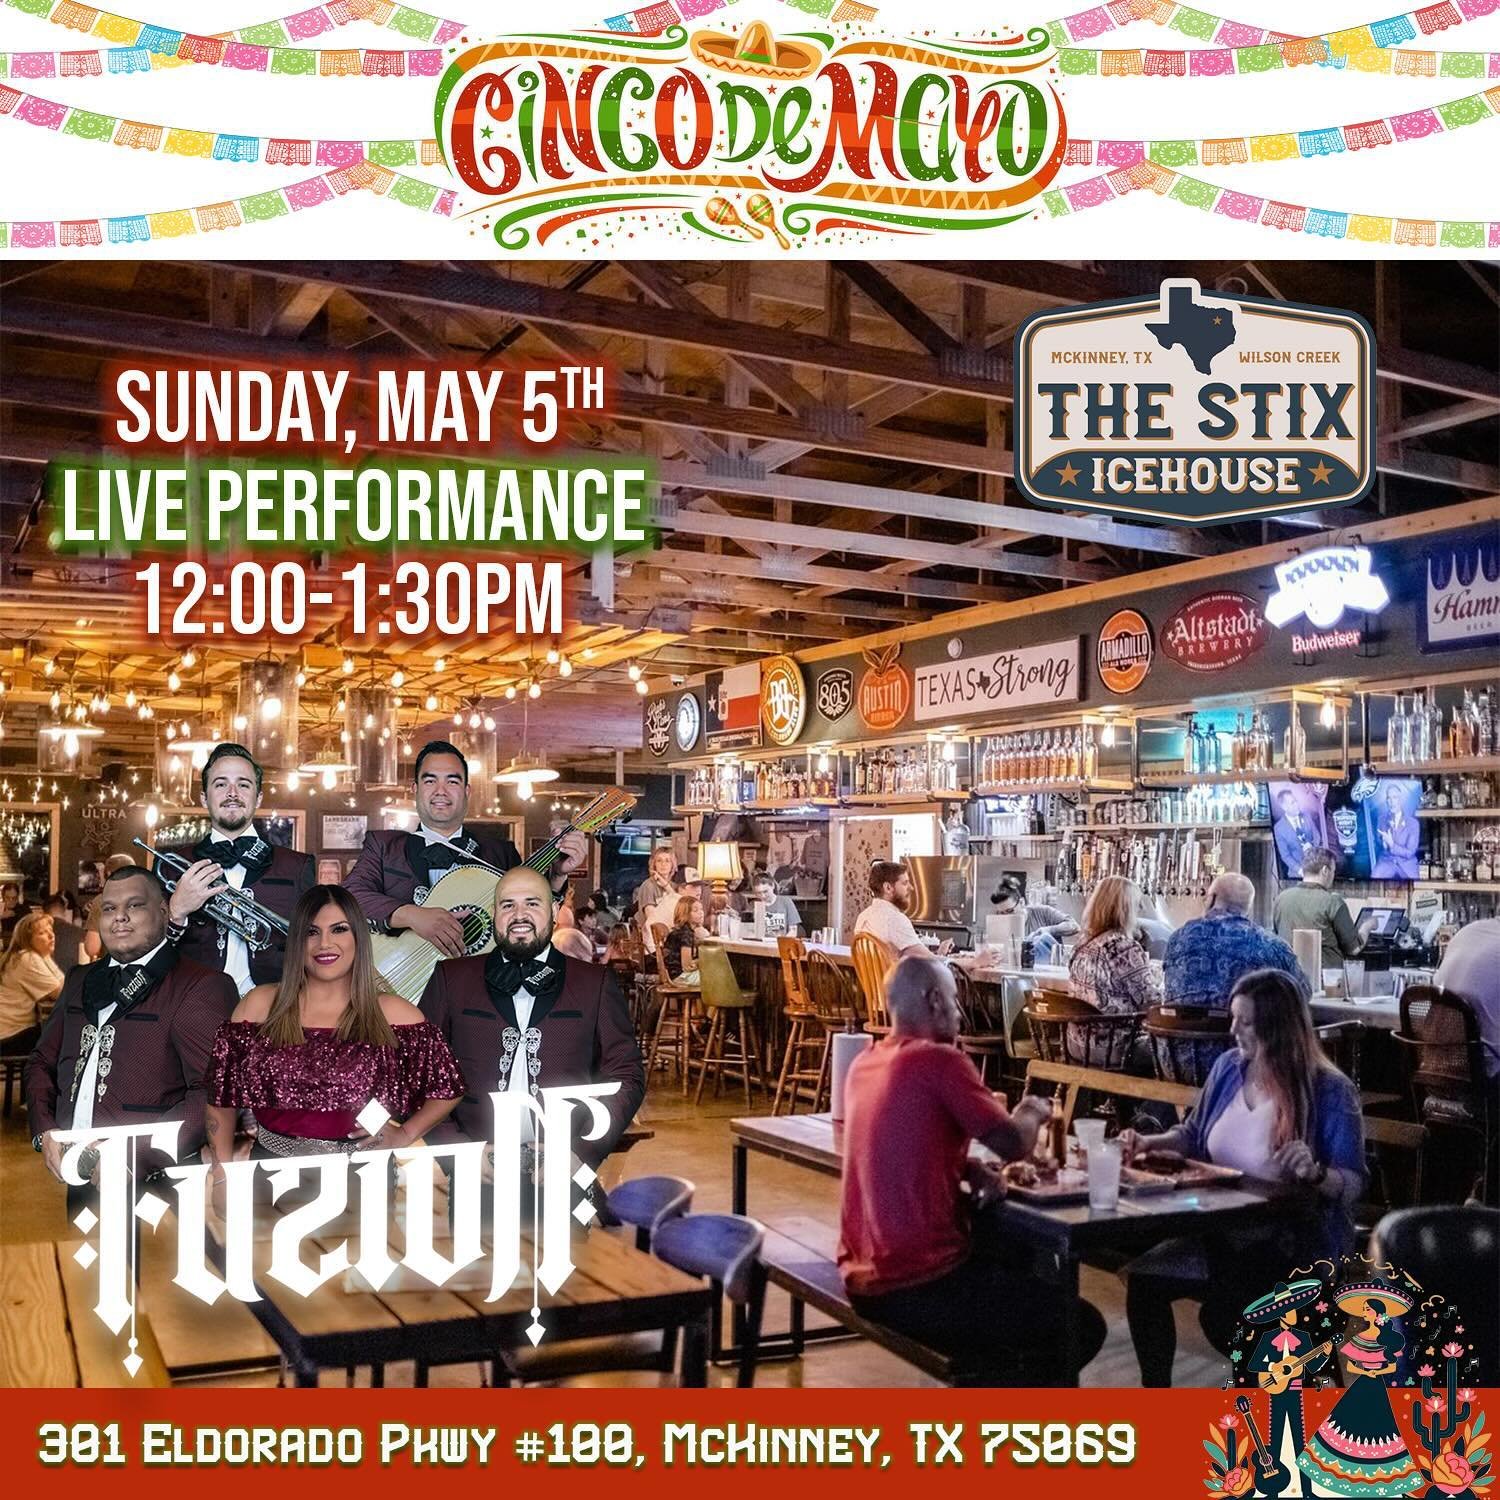 🎉McKINNEY, TX🎉

Here&rsquo;s your first top to celebrate #CincoDeMayo with us! 💃🏽🪗🎺🎻🎶🇲🇽🍸🍹🍻 #fuzionmariachi #livemusic ##cincodedrinko #dfw #tour